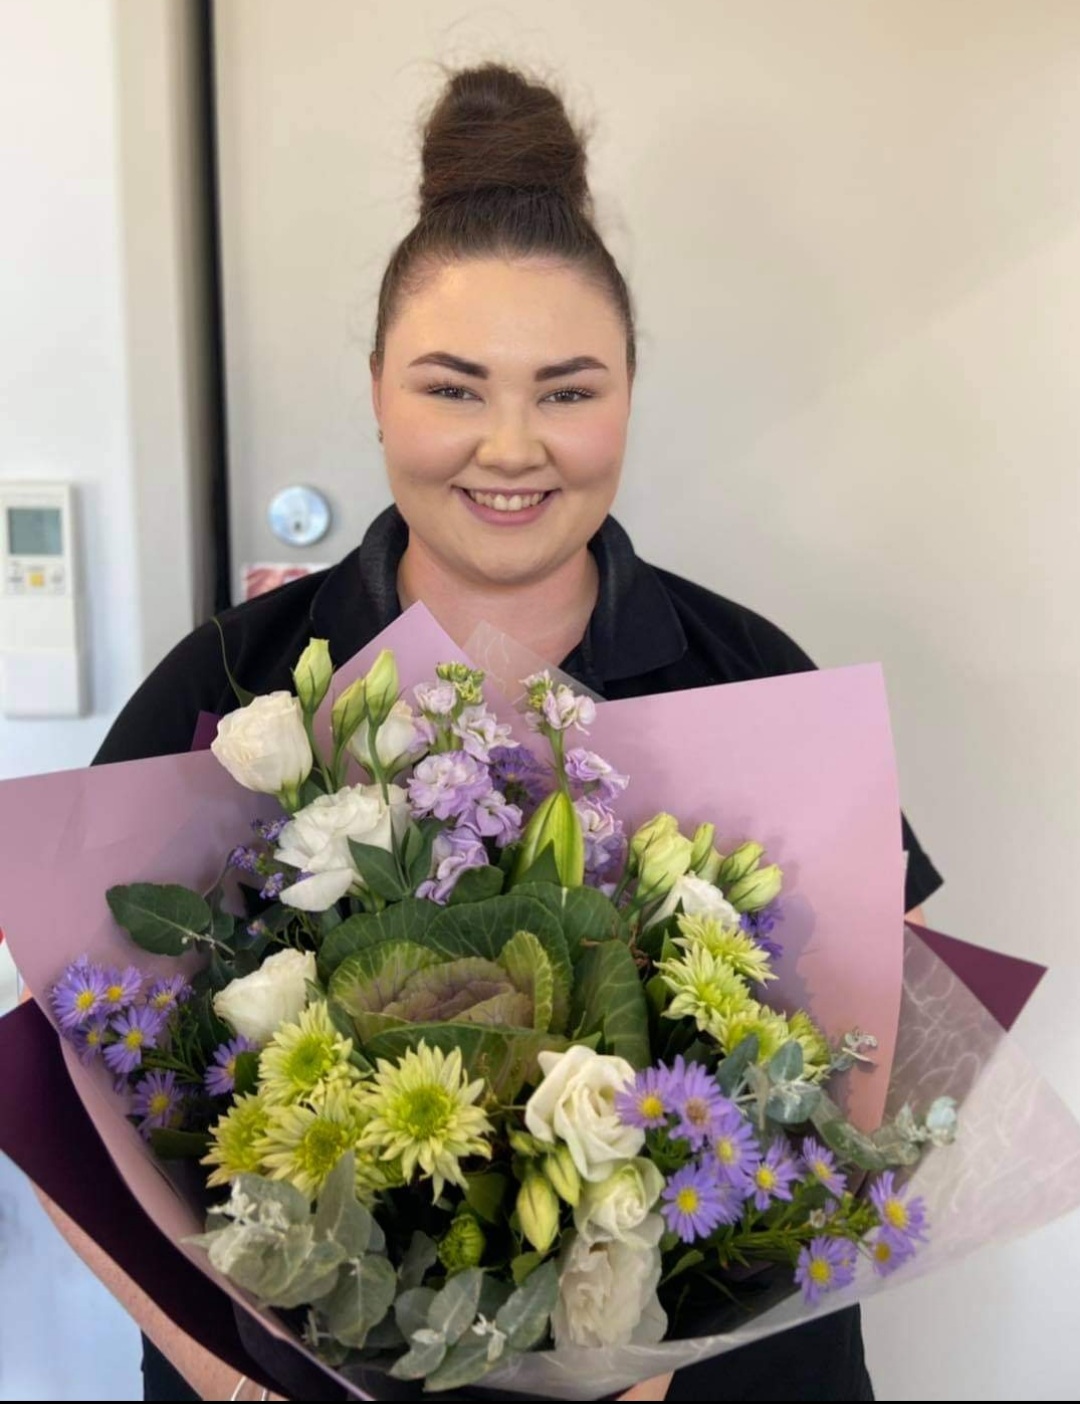 Ararat local email holding flowers to congratulate her on finishing Early Childhood Education and Care Diploma